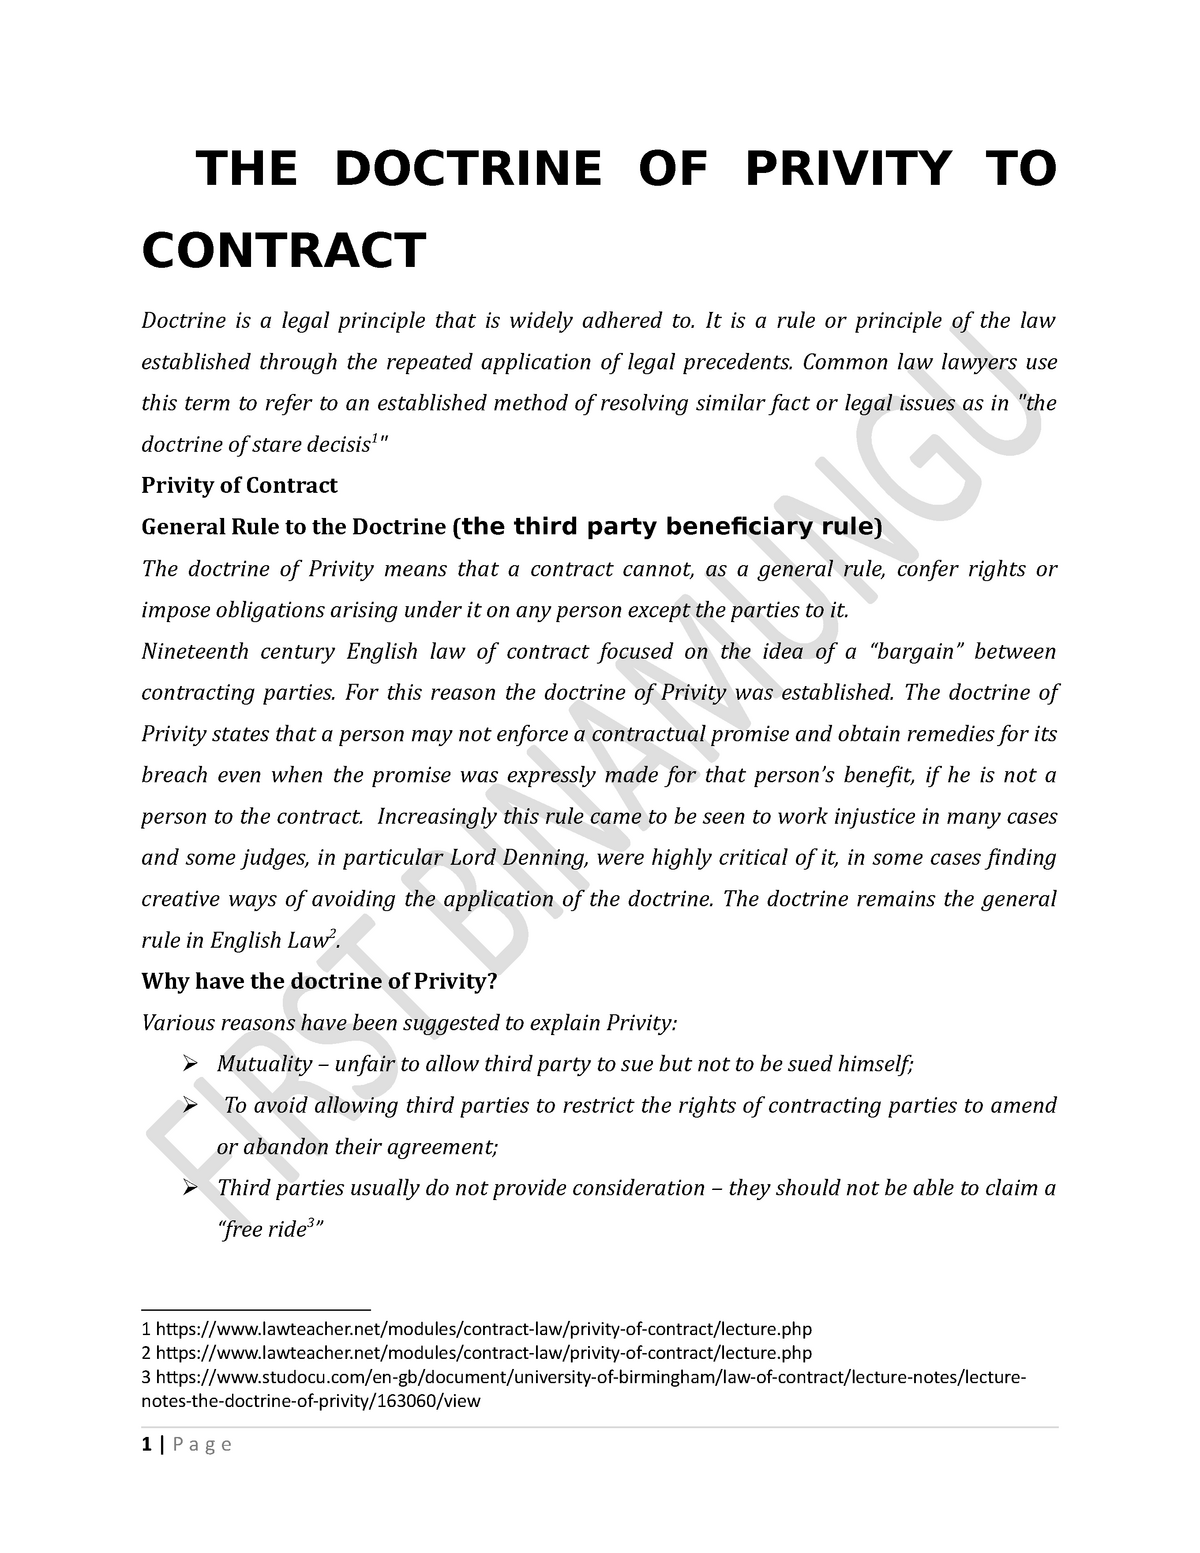 doctrine of privity contract law essay